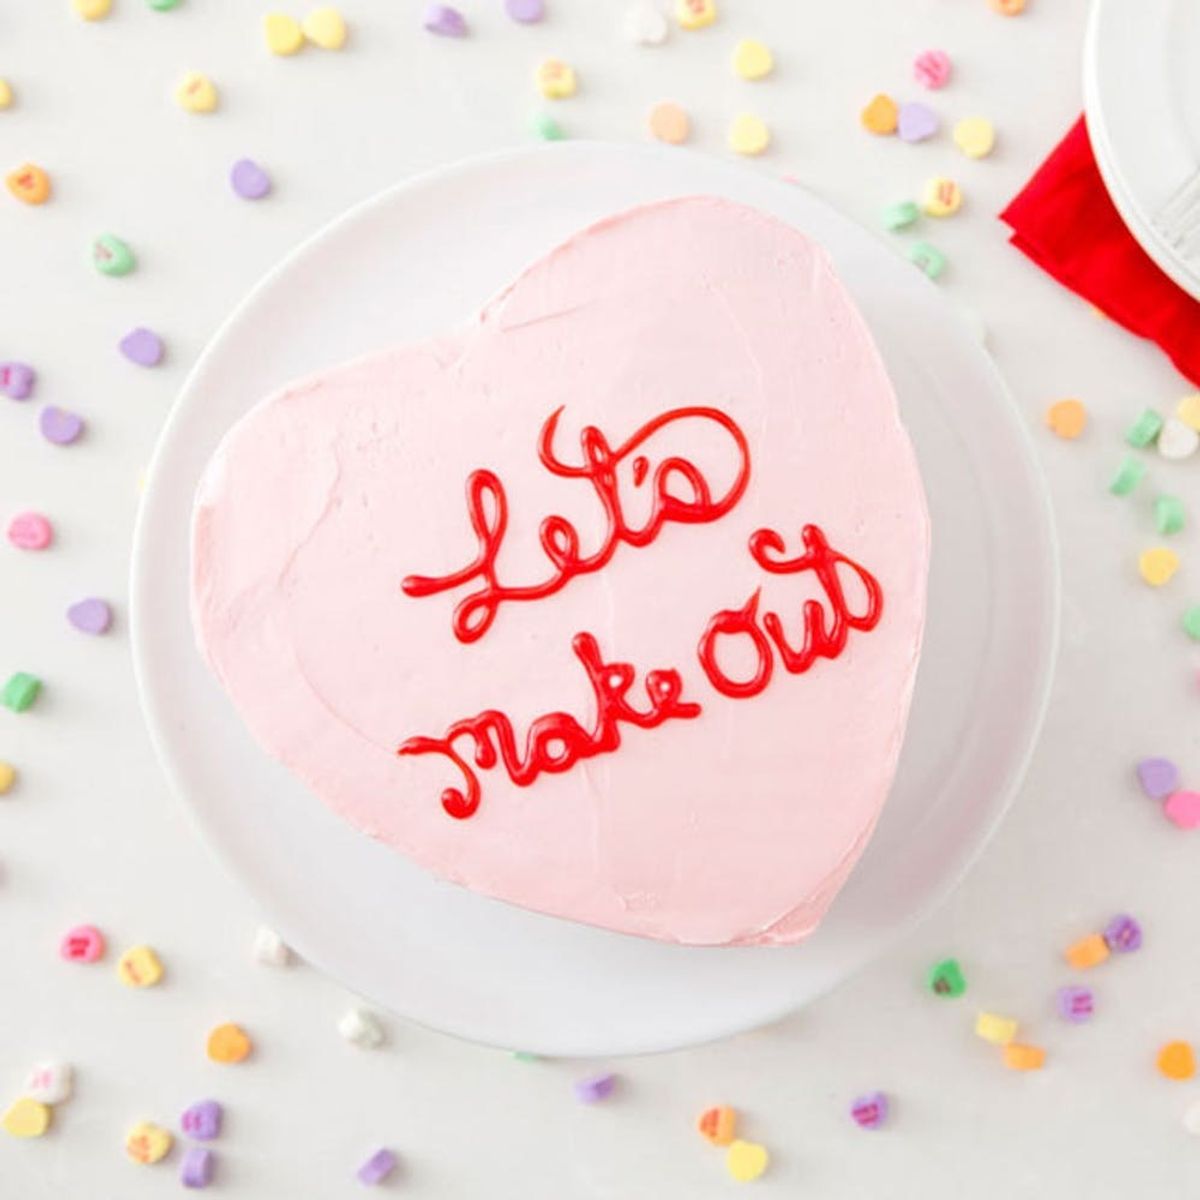 10 Creative Conversation Heart Recipes for Your Valentine